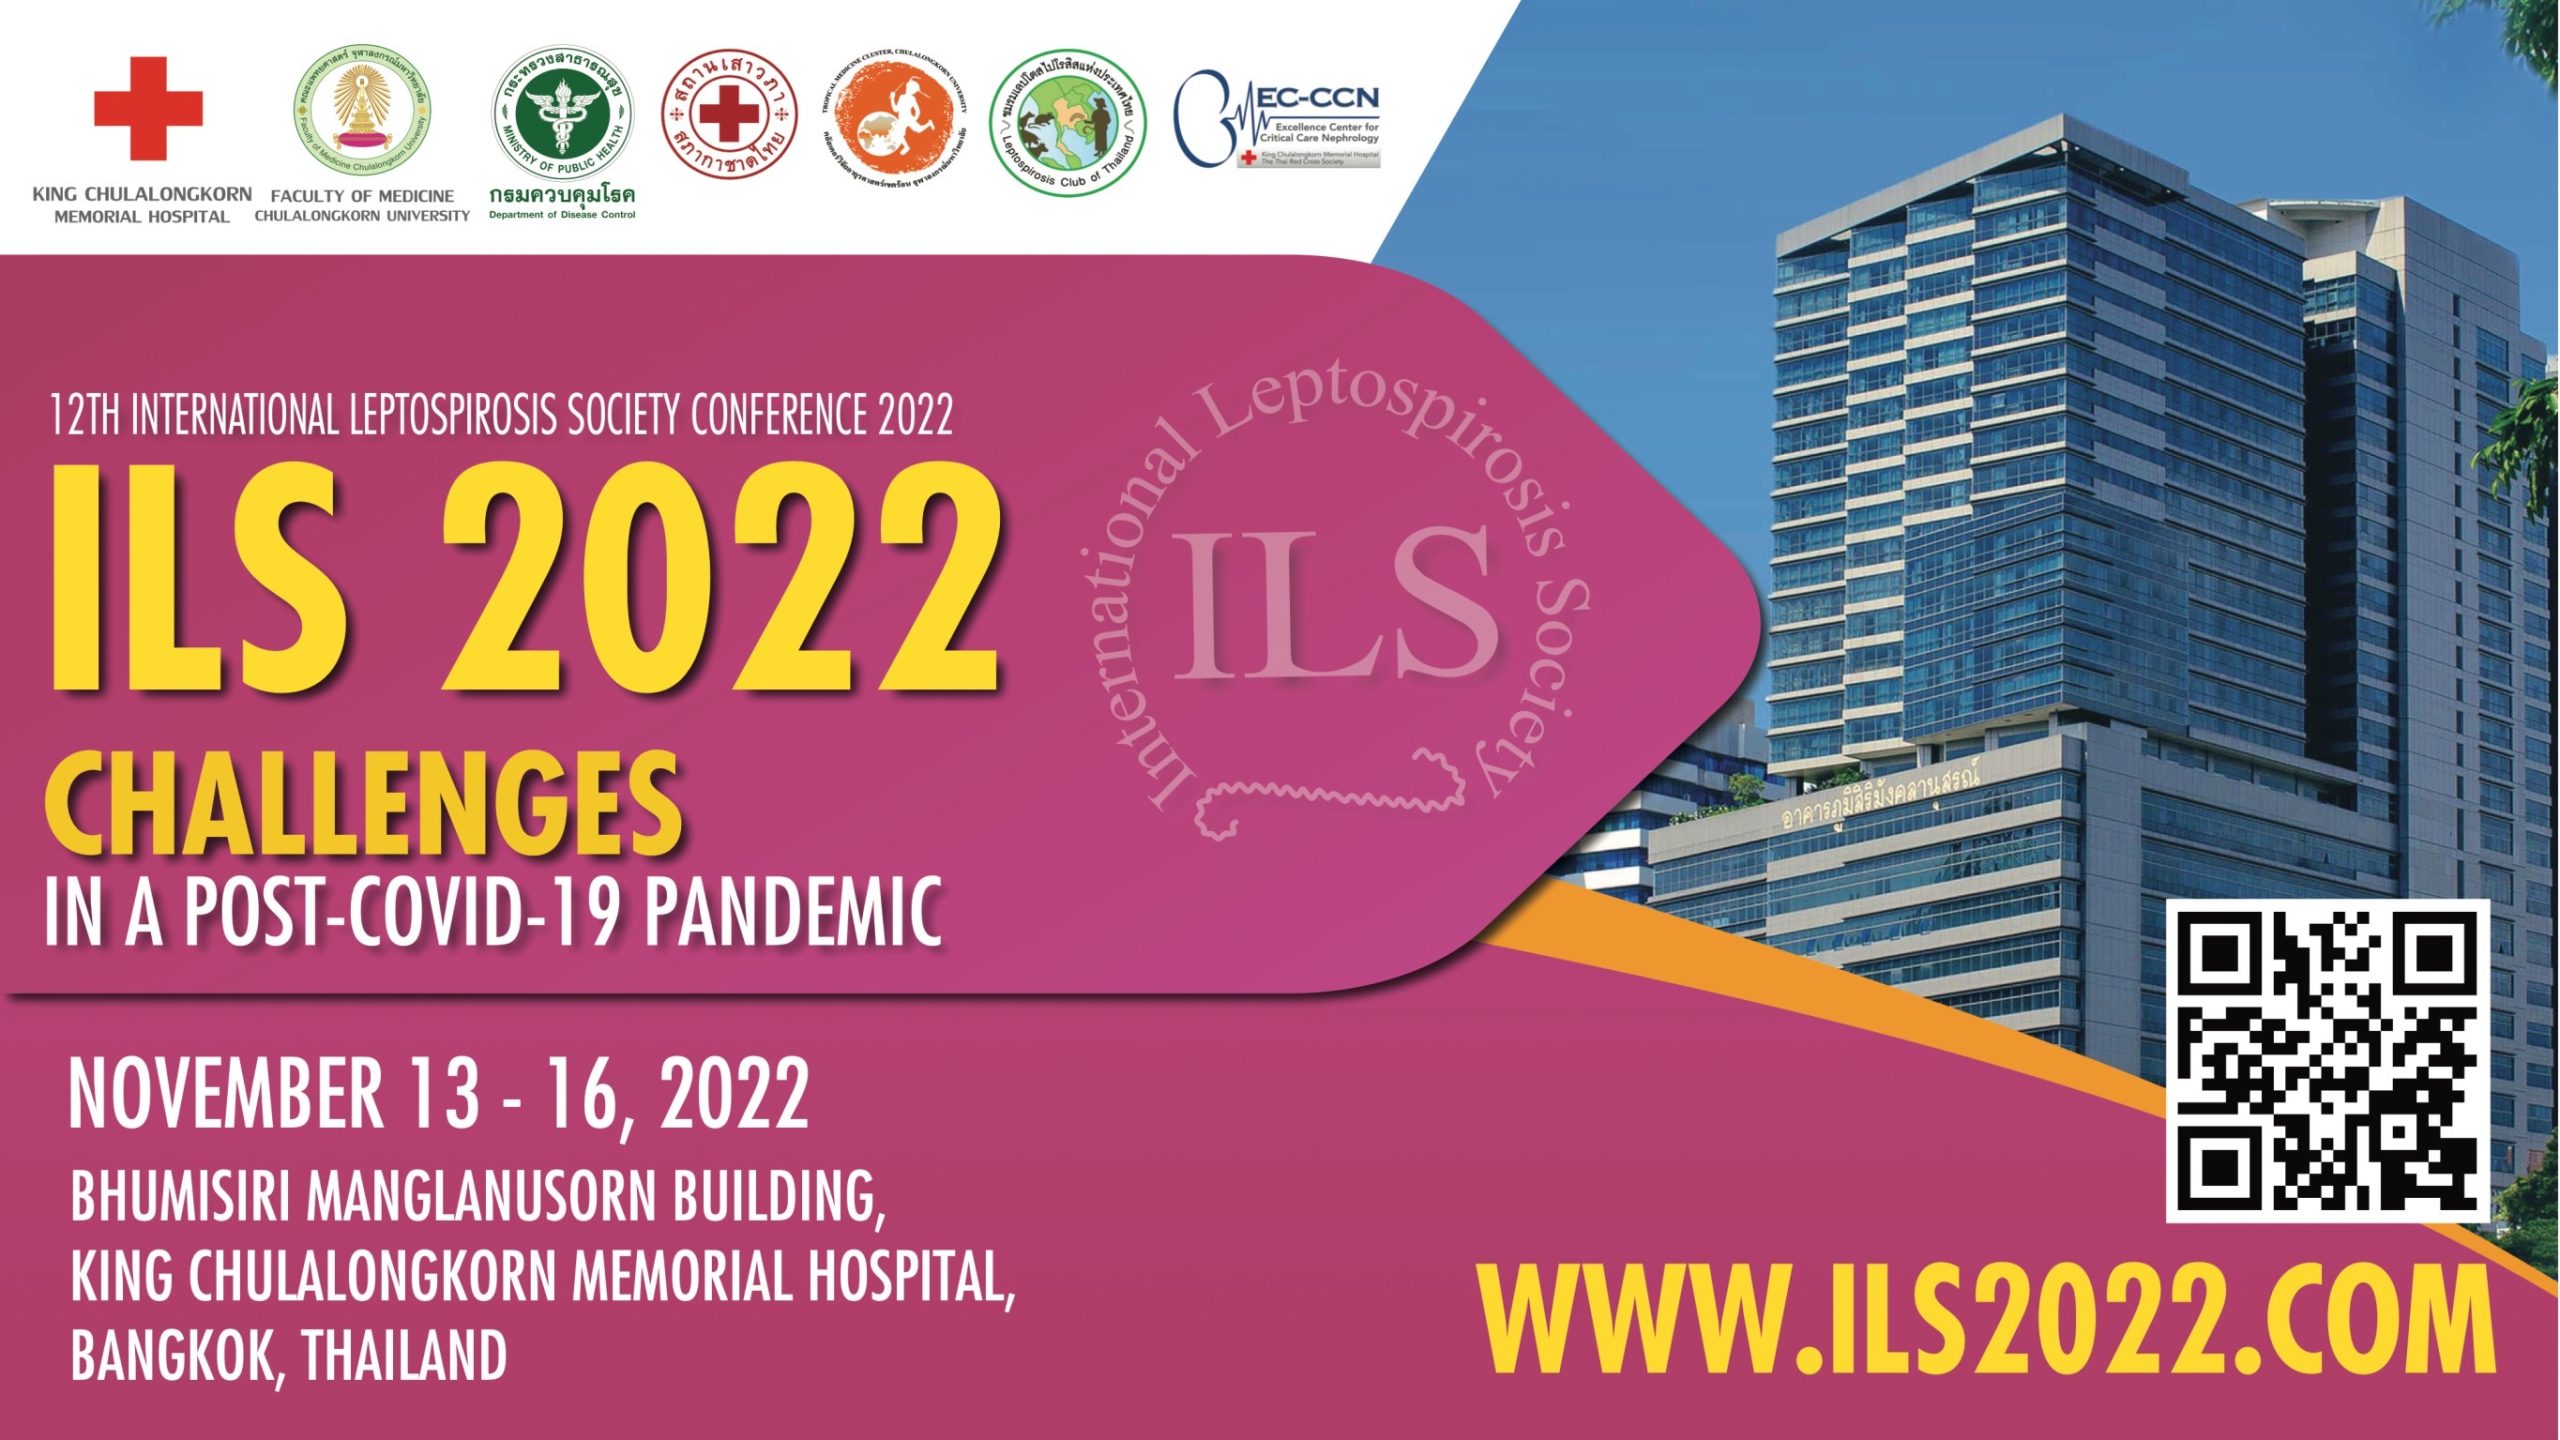 ILS 2022 CHALLENGES IN A POST-COVID-19 PANDEMIC